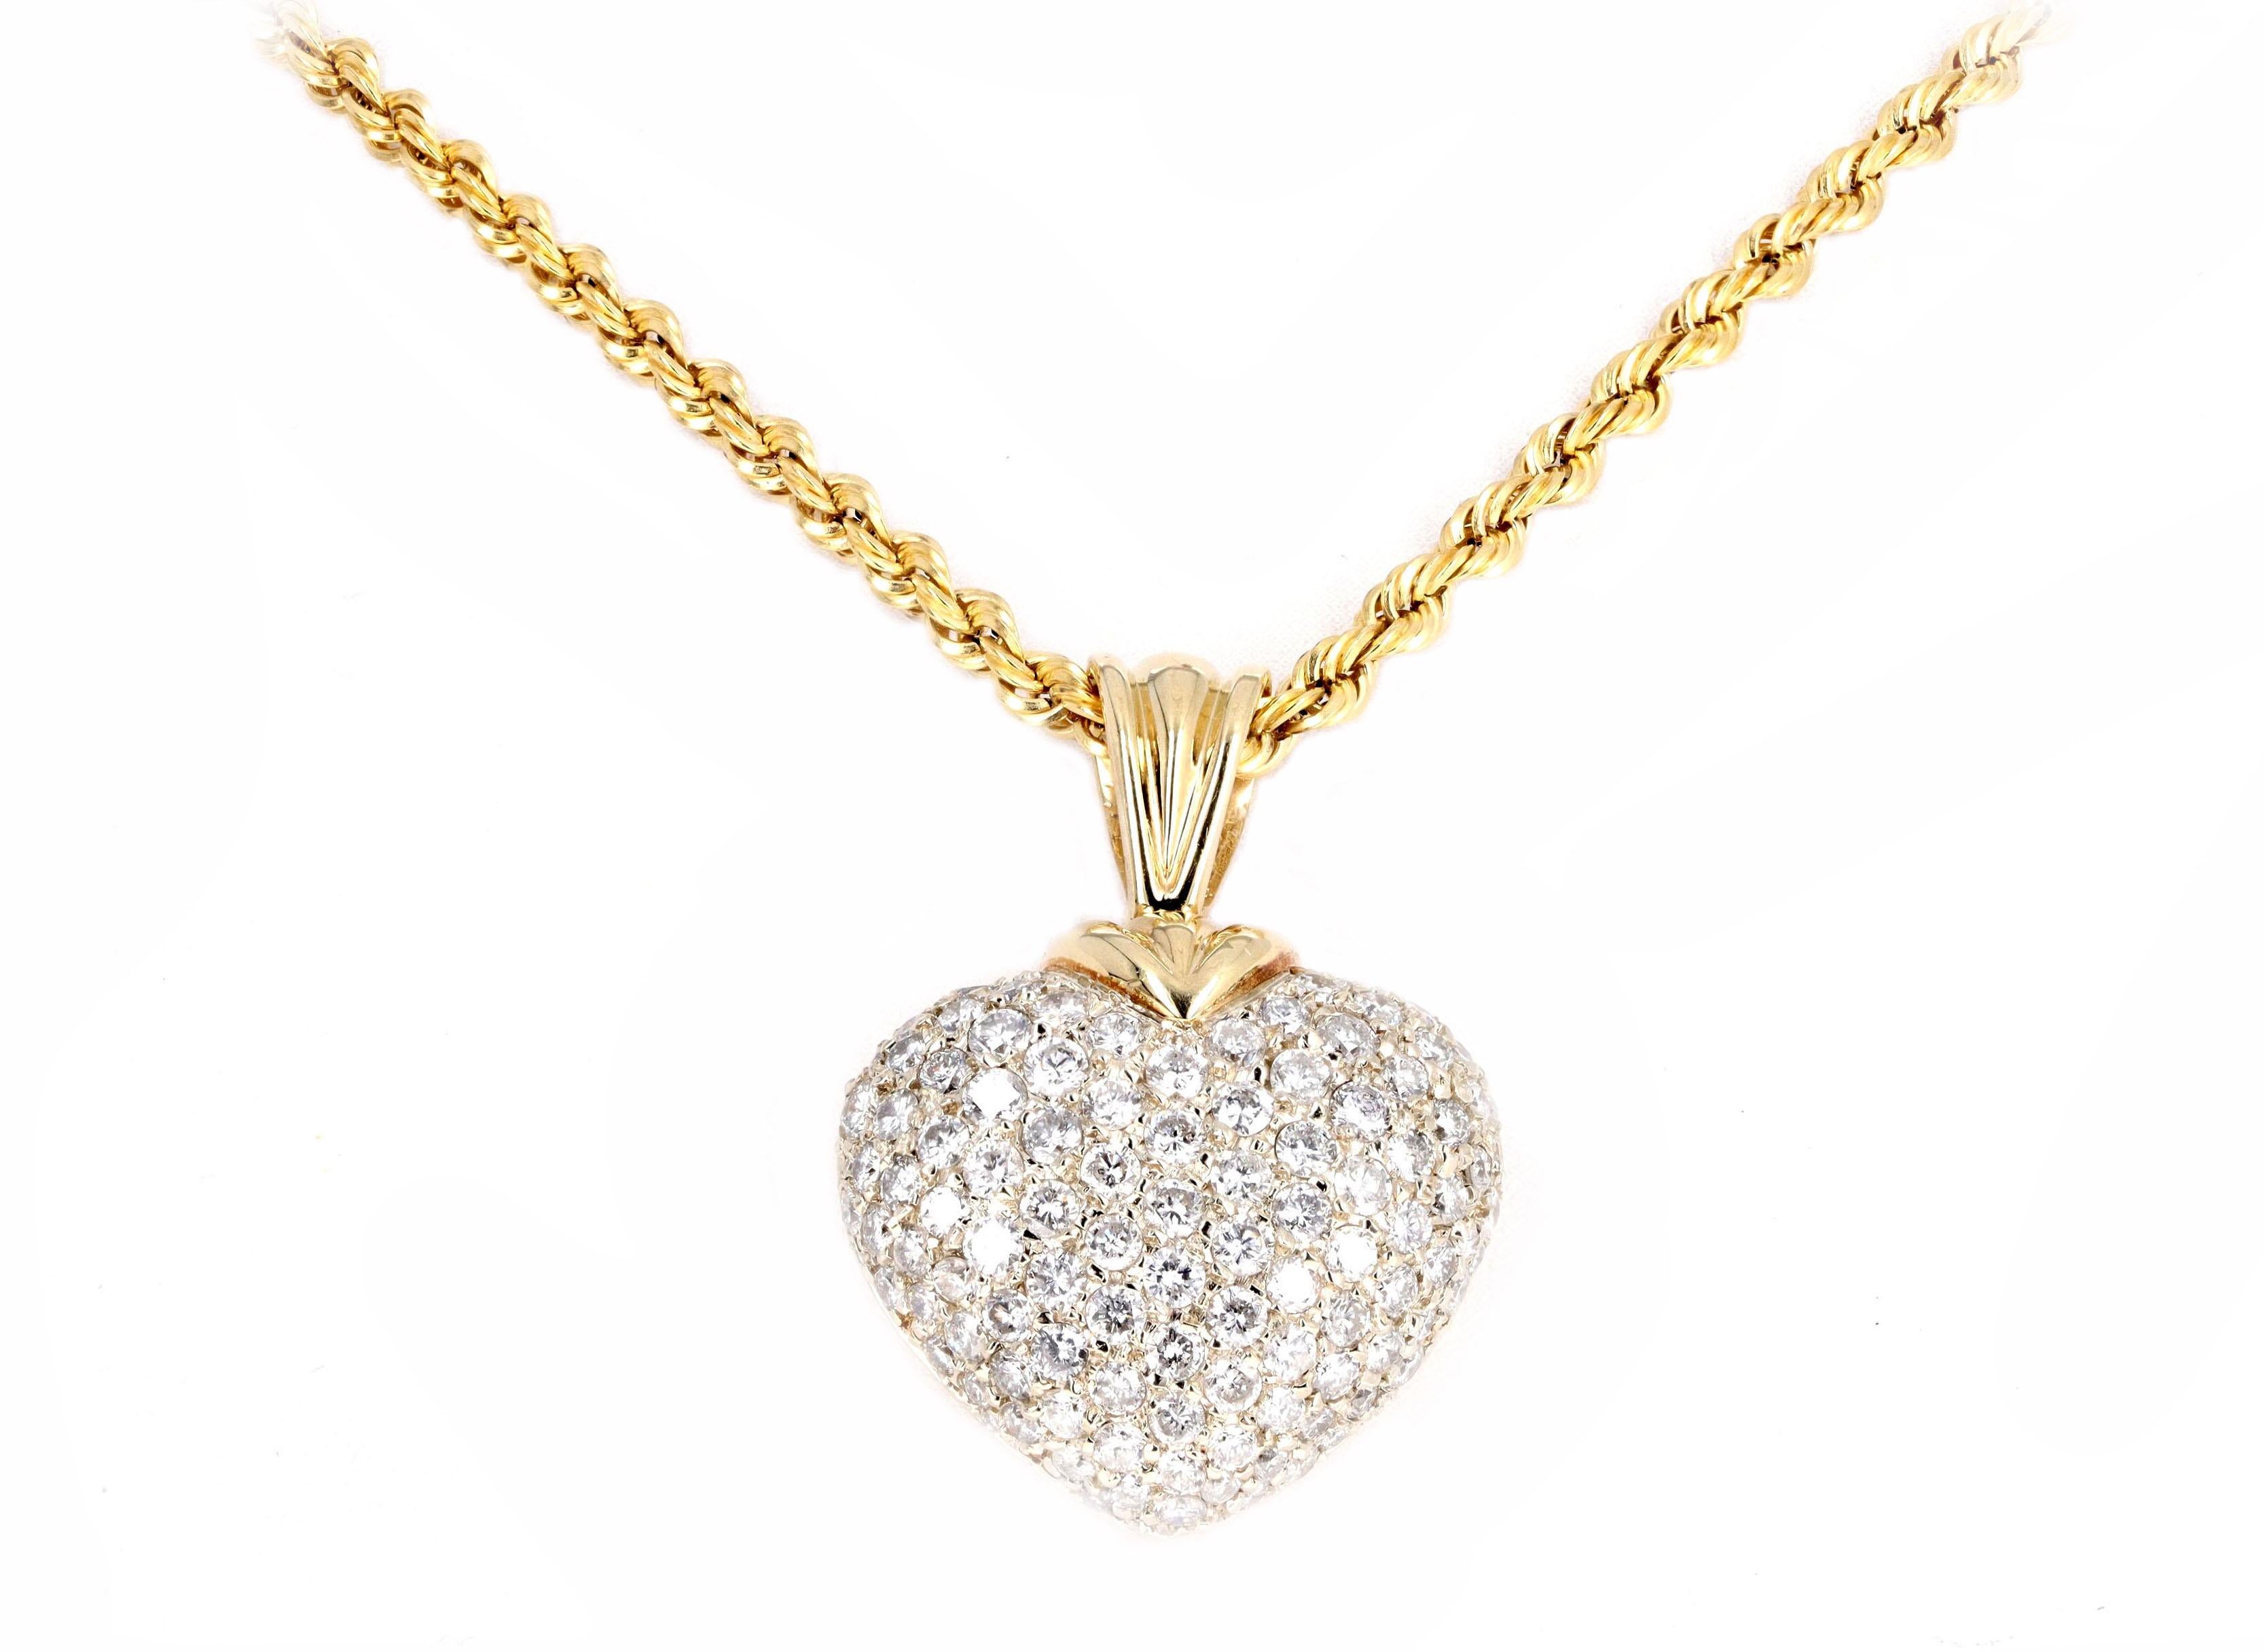 Era: Modern Estate

Composition: 14K Yellow Gold

Primary Stone: Round Brilliant Cut Diamonds

Total Carat Weight: Approximately 3.5 Carats

Color/Clarity: G-H / I1

Pendant Dimensions: 1.45'' L(including bail) / 1'' W

Necklace Length: 19